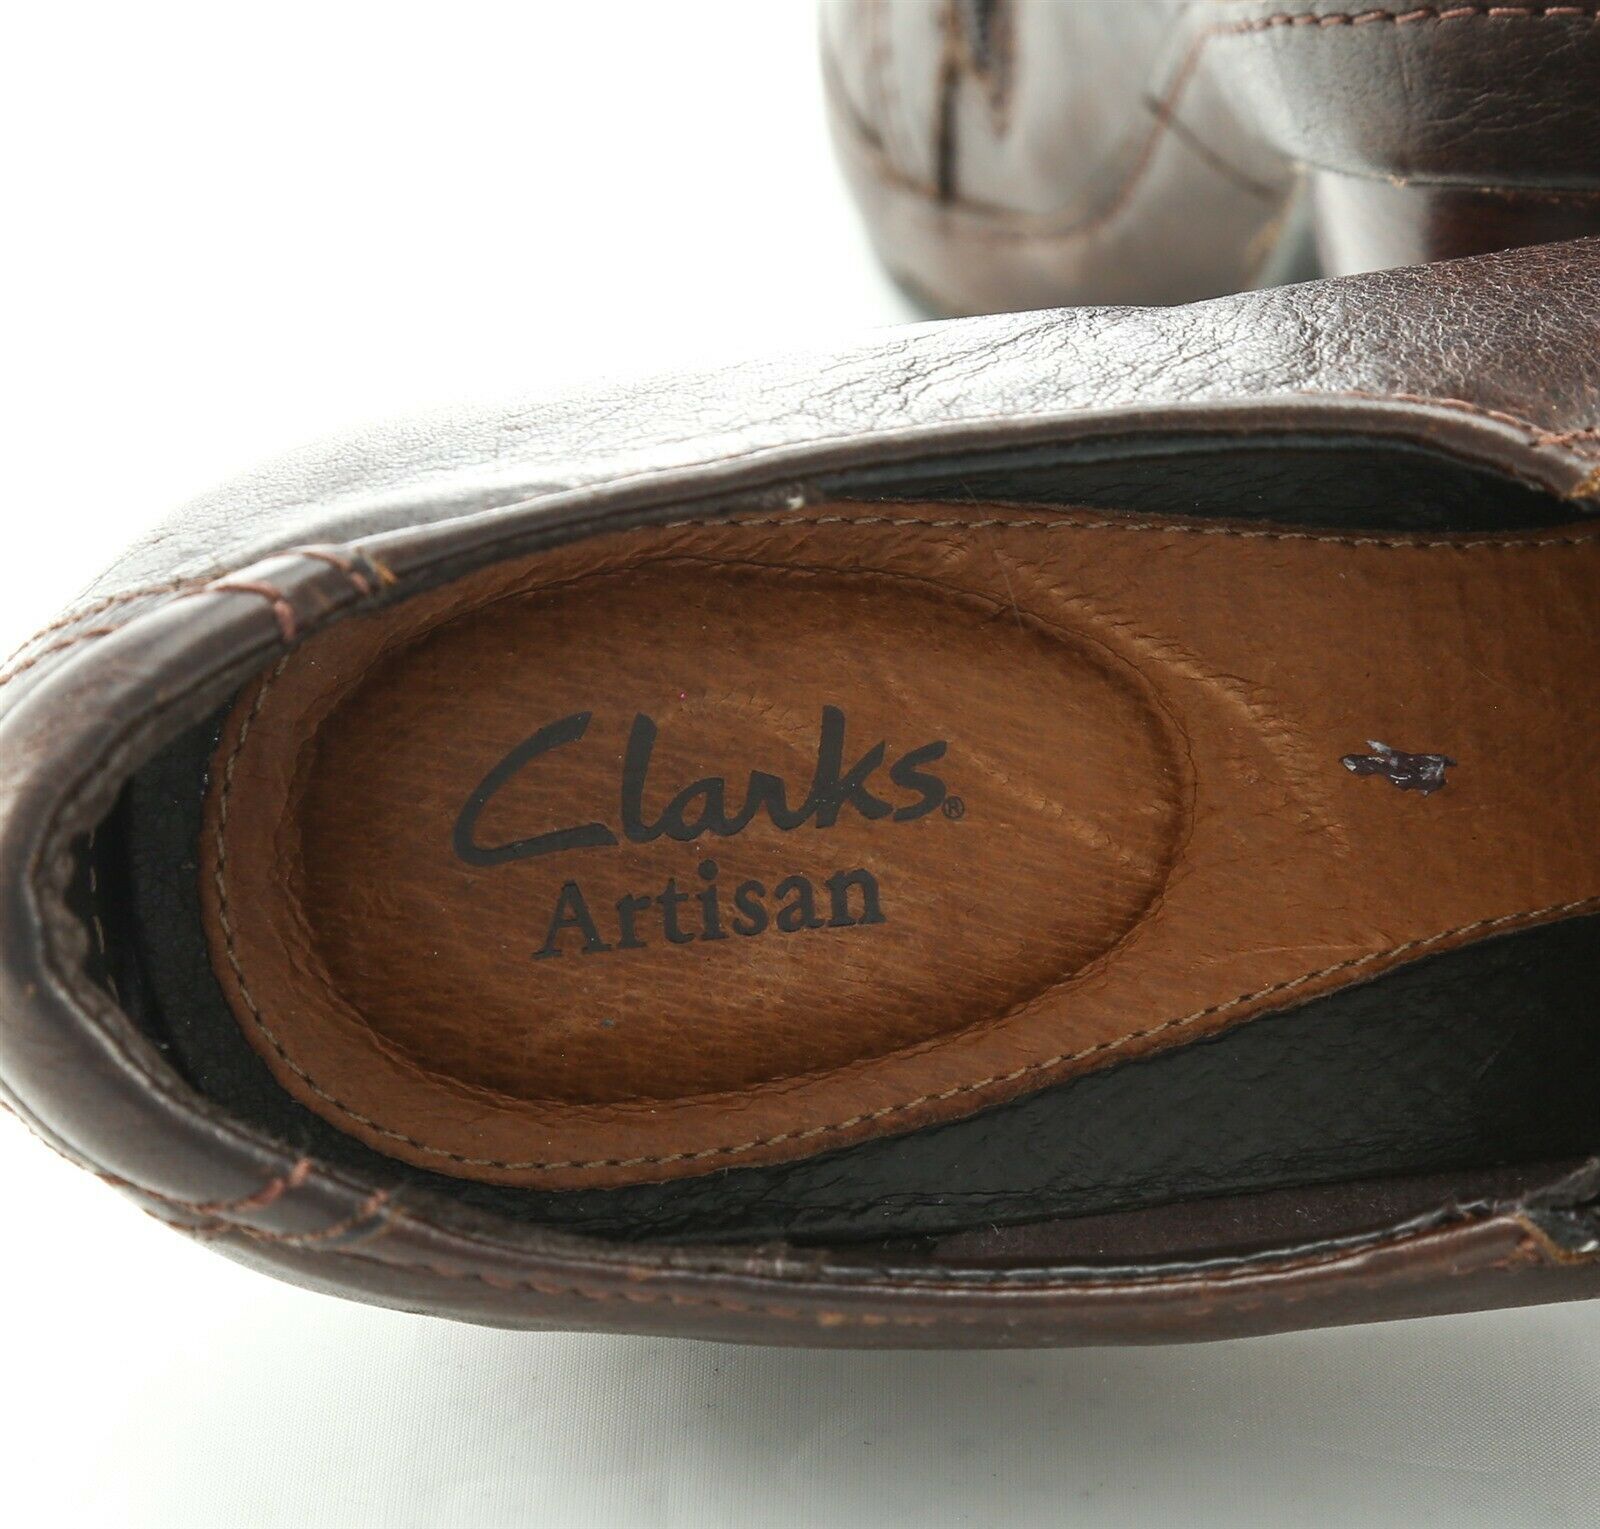 clarks womens shoes with zipper